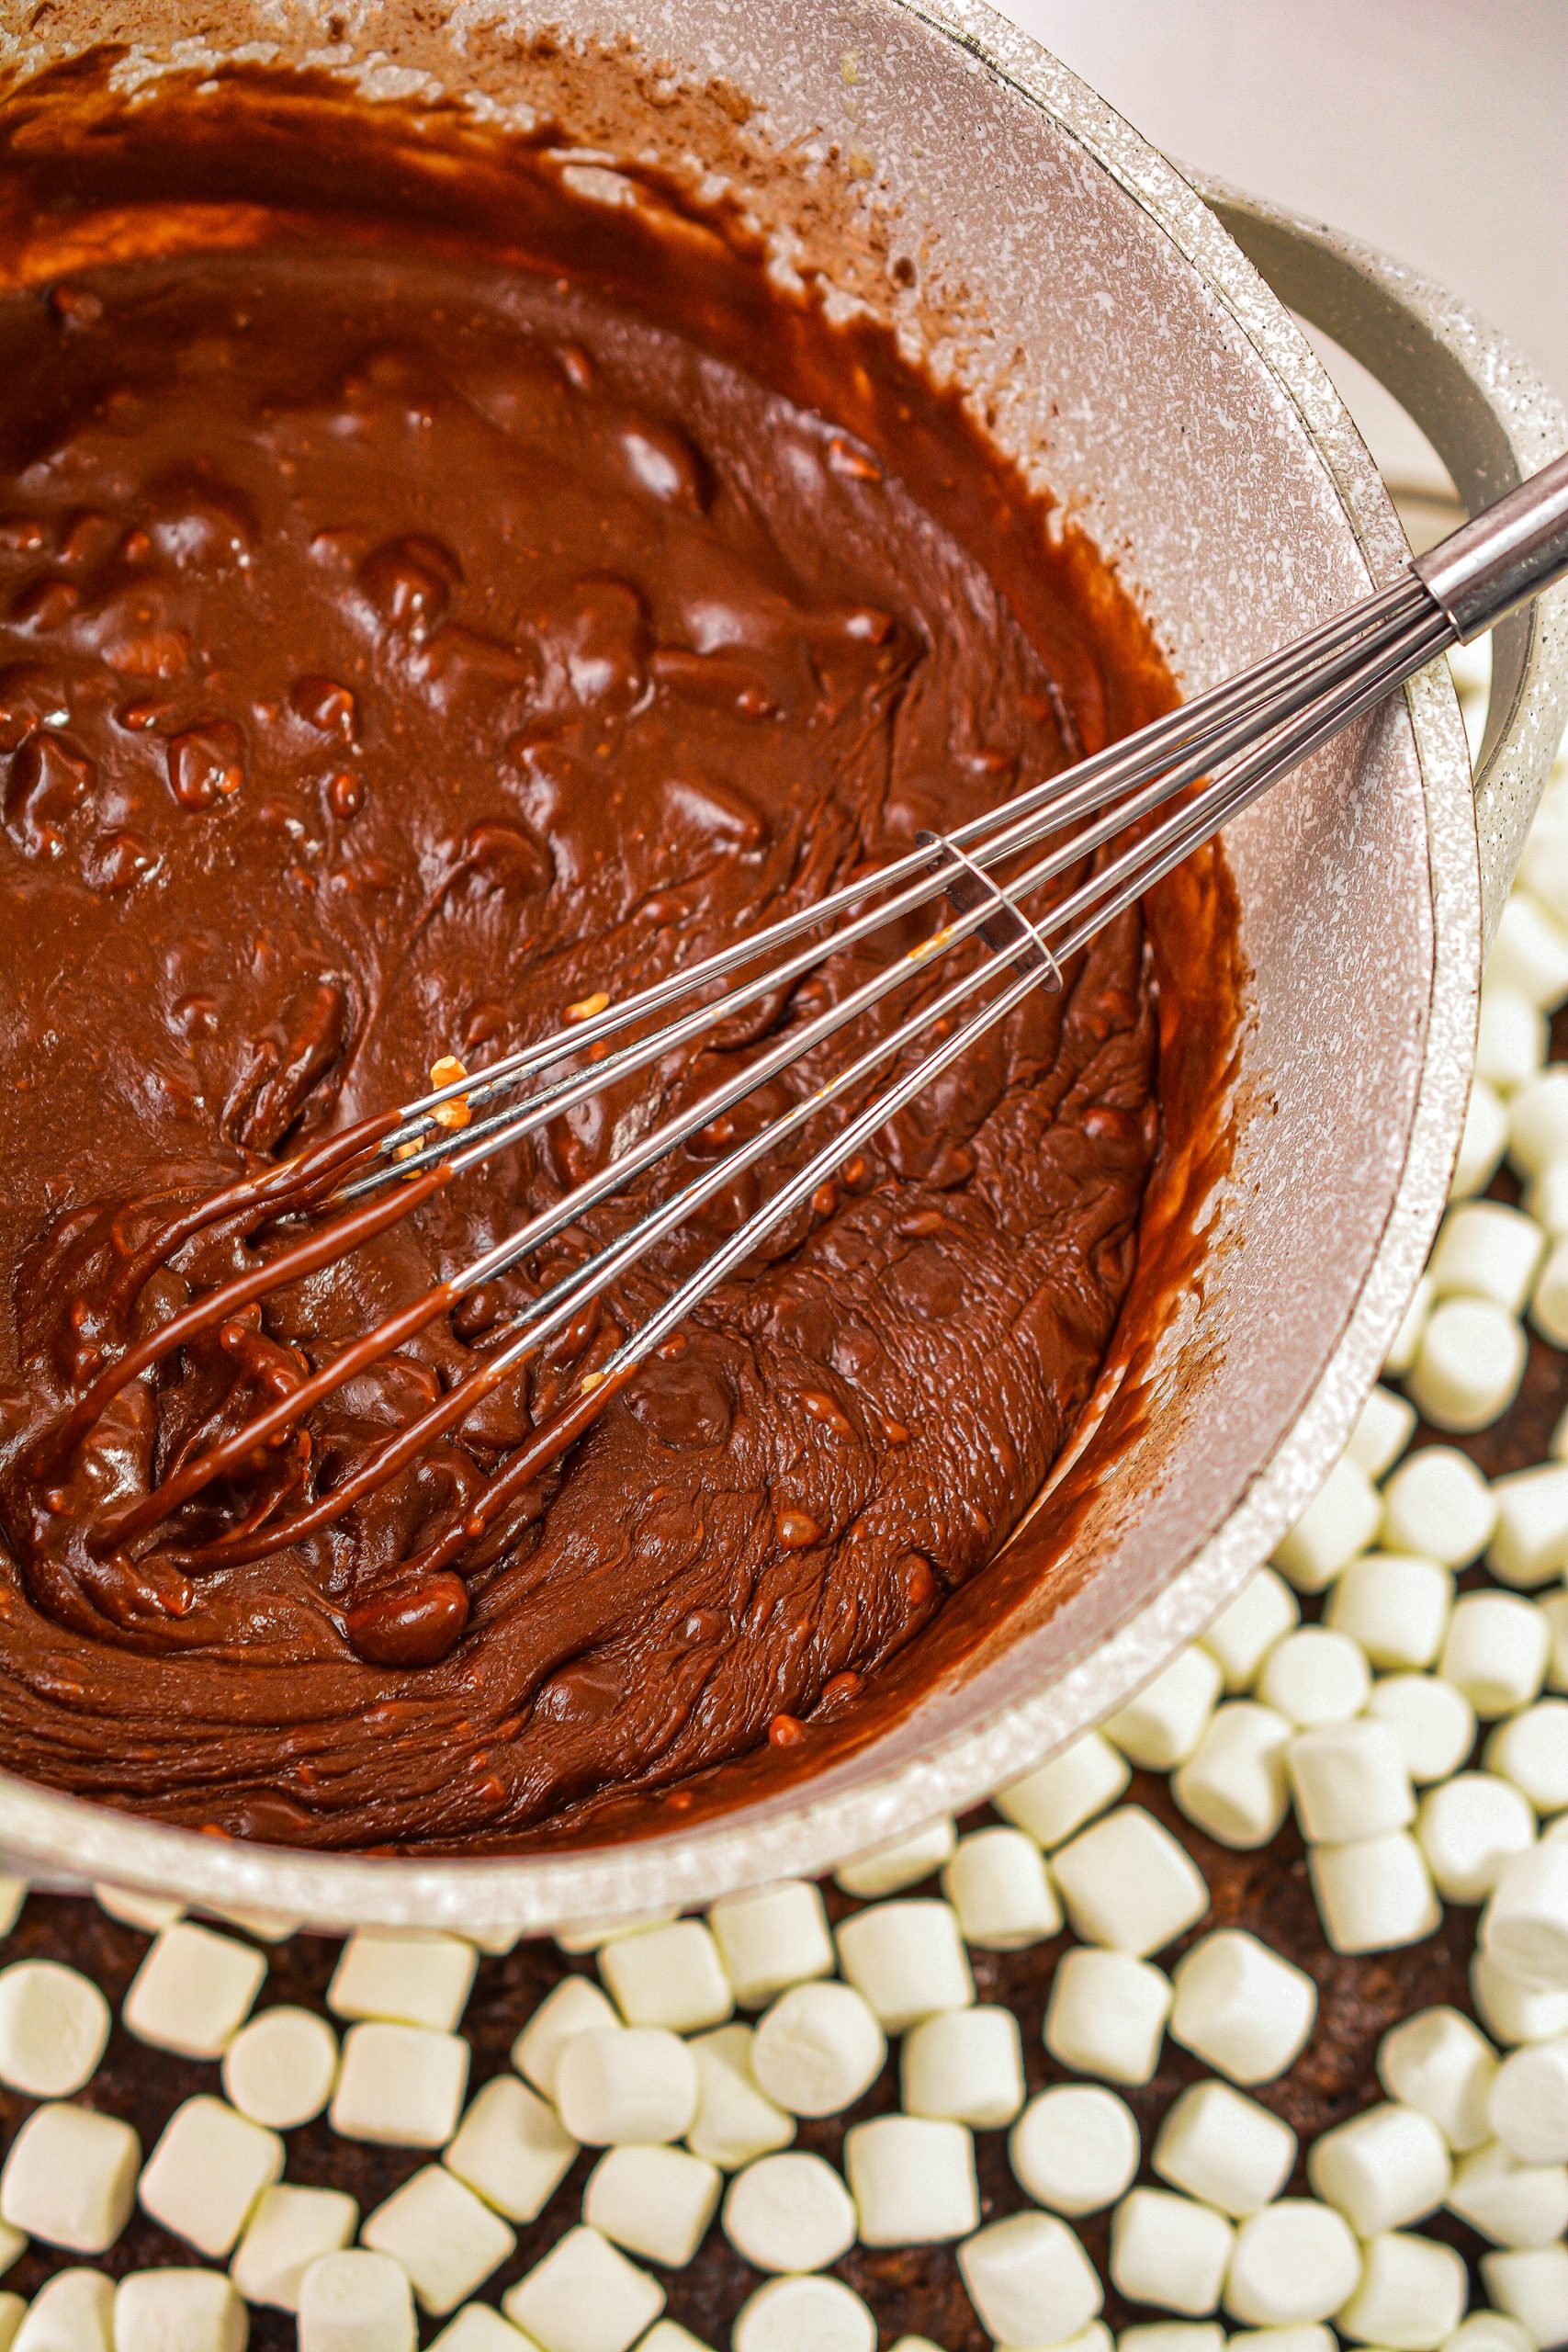 Drizzle the chocolate mixture over the mini marshmallows on the cake.